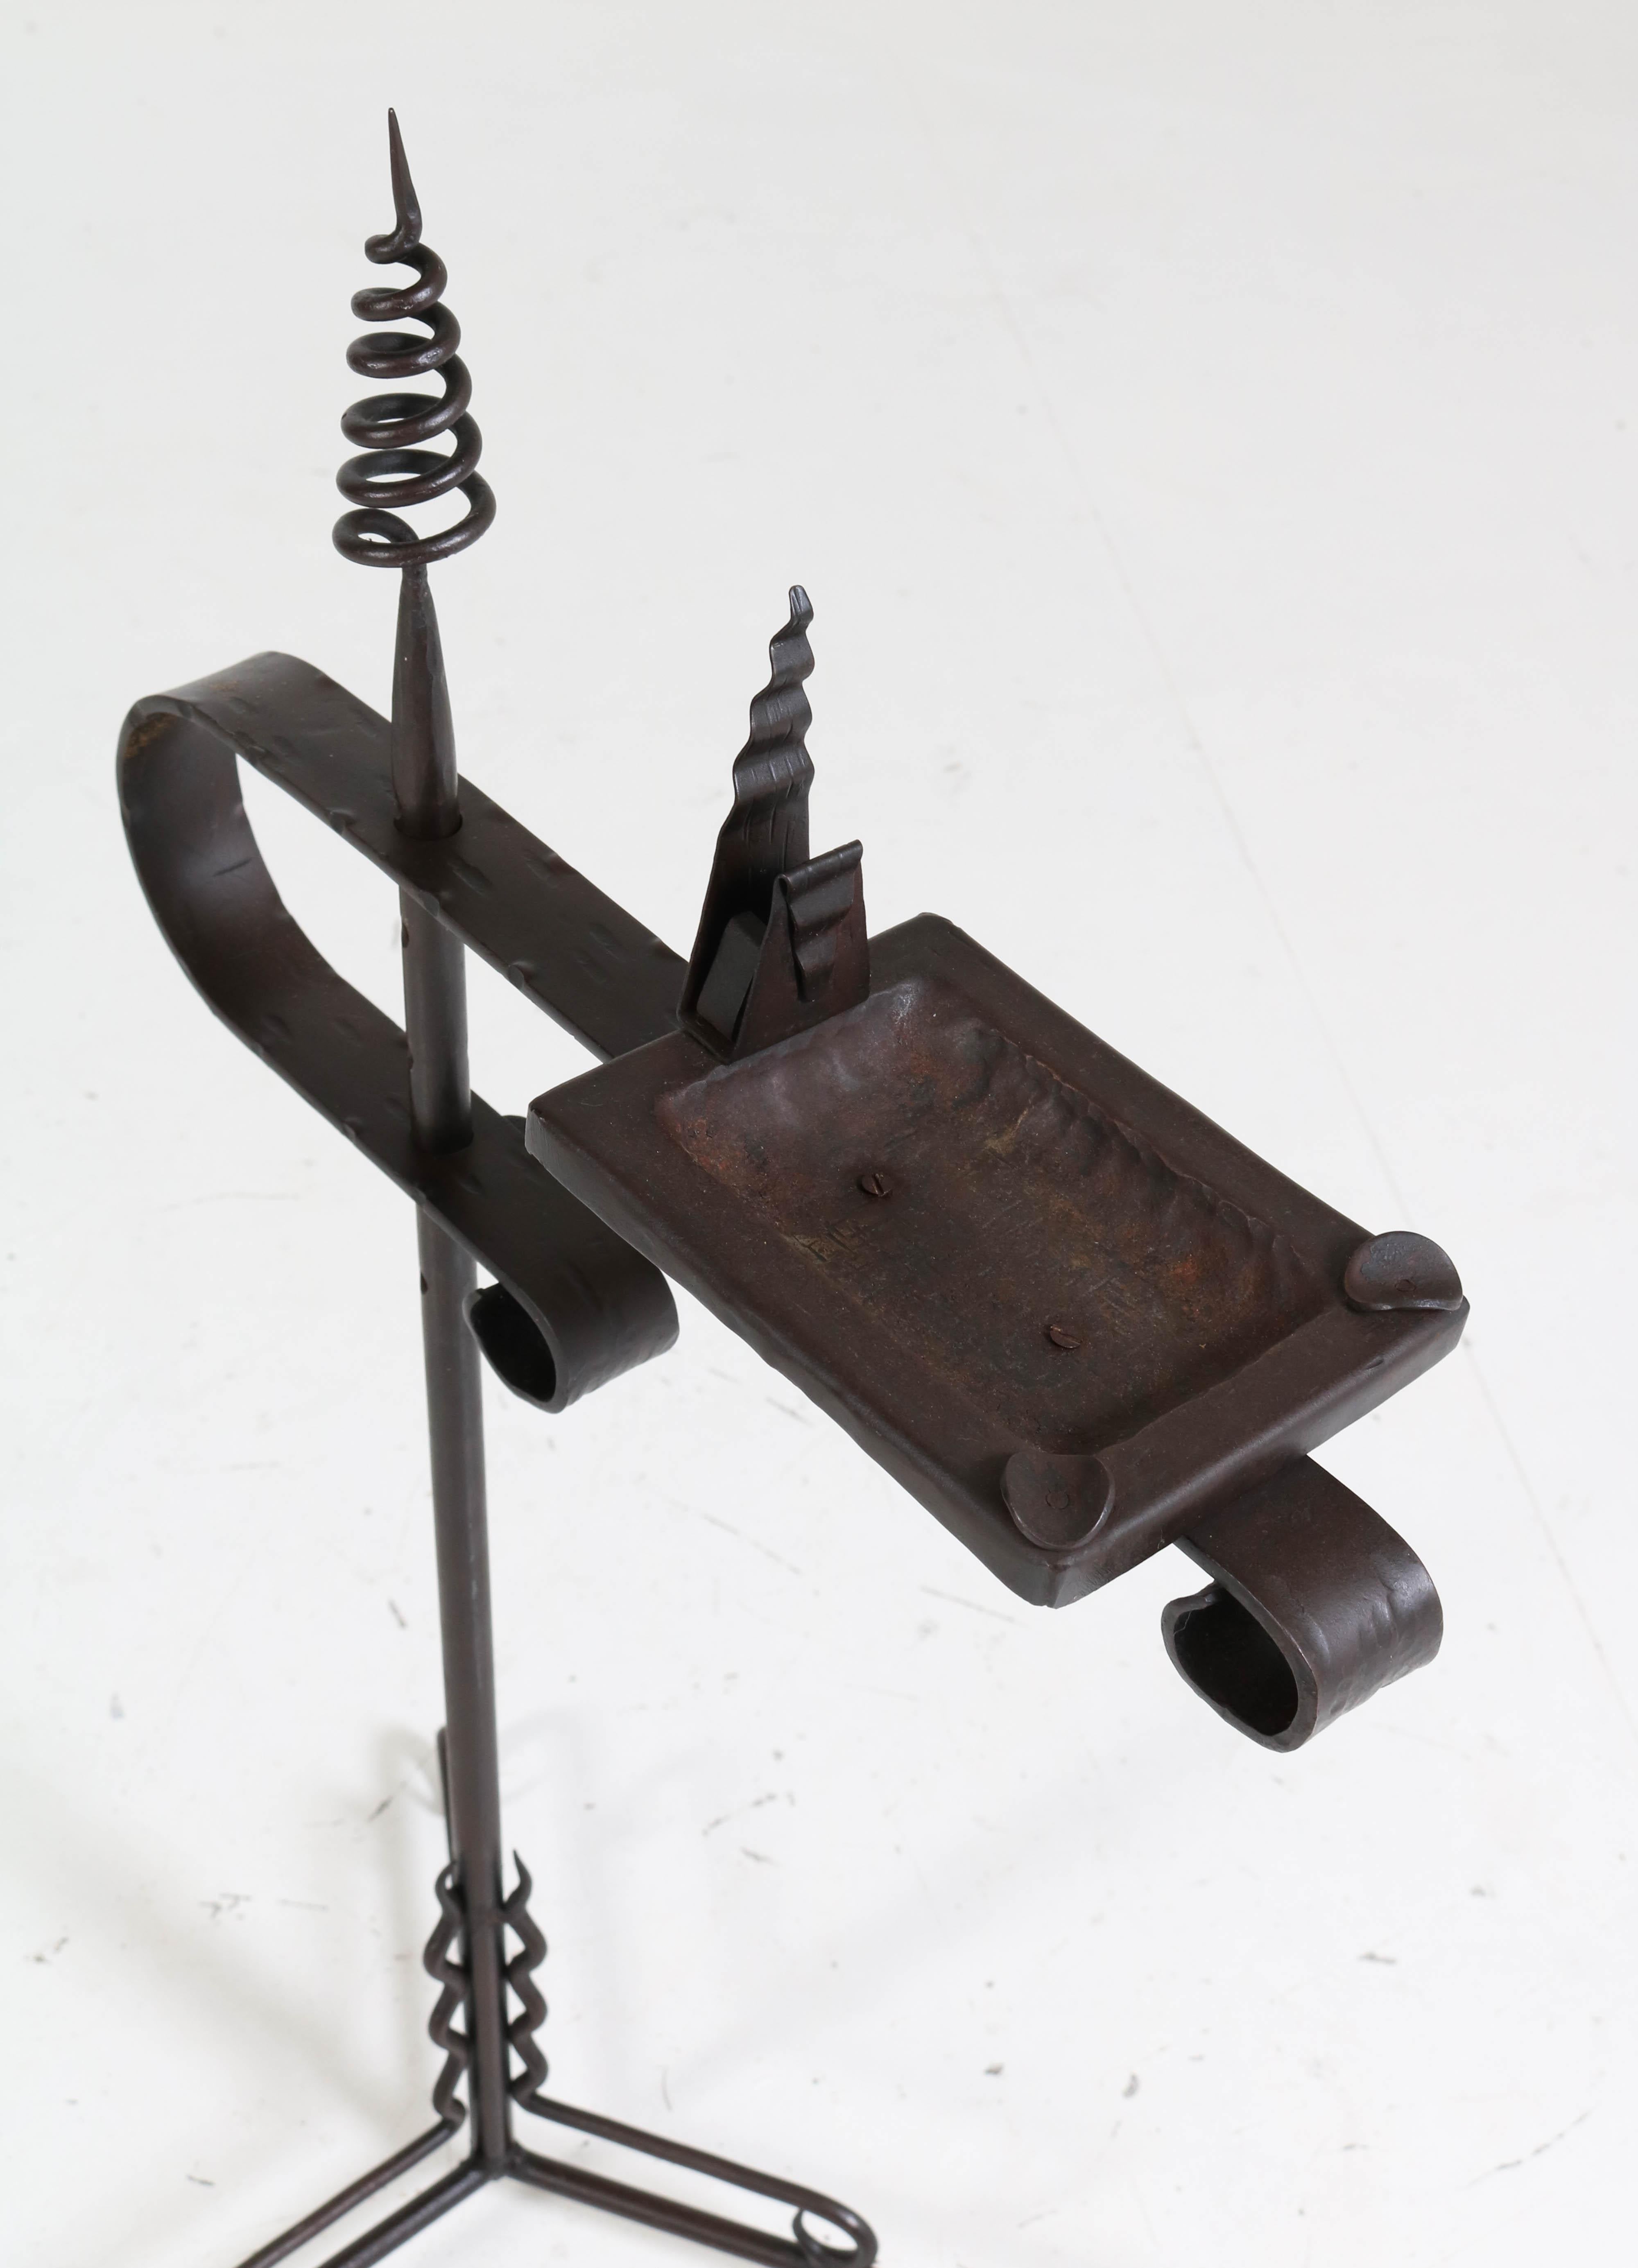 Early 20th Century Wrought Iron Art Deco Amsterdam School Ashtray Stand by J. Boerman, 1920s